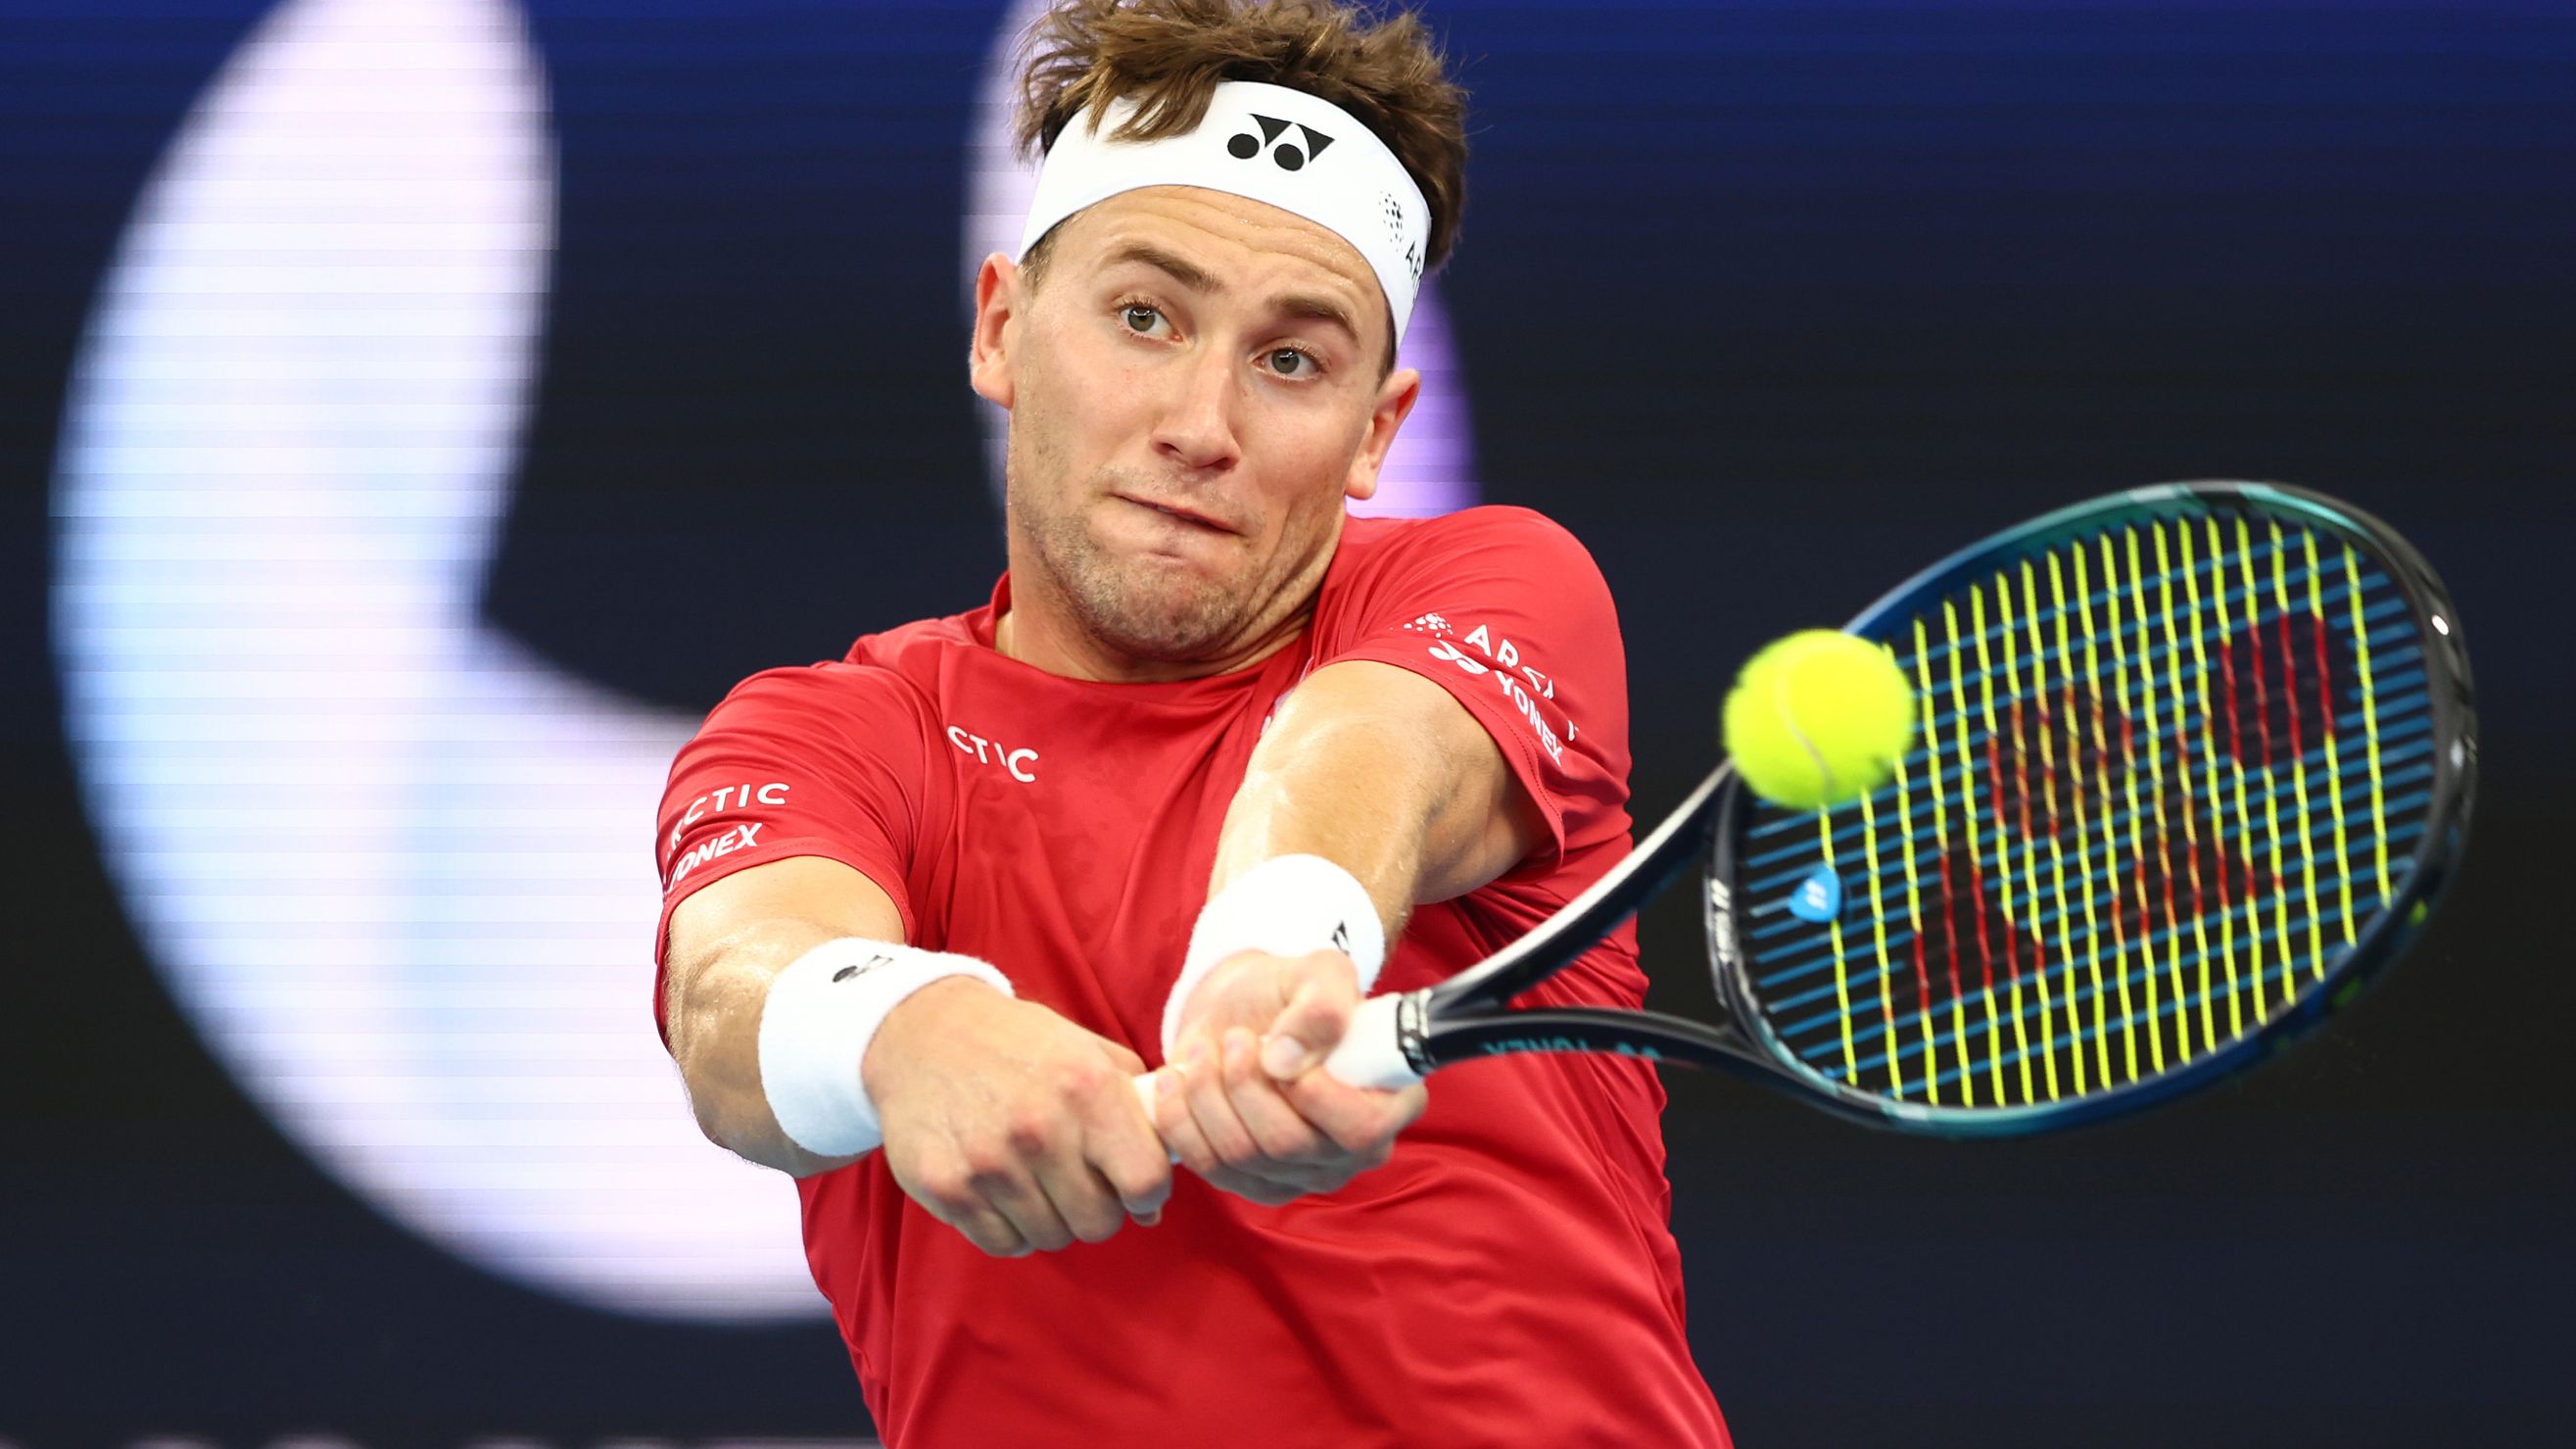 BRISBANE, AUSTRALIA - JANUARY 01: Casper Ruud of Norway plays a backhand in his match against Thiago Monteiro of Brazi during day four of the 2023 United Cup at Pat Rafter Arena on January 01, 2023 in Brisbane, Australia. (Photo by Chris Hyde/Getty Images)